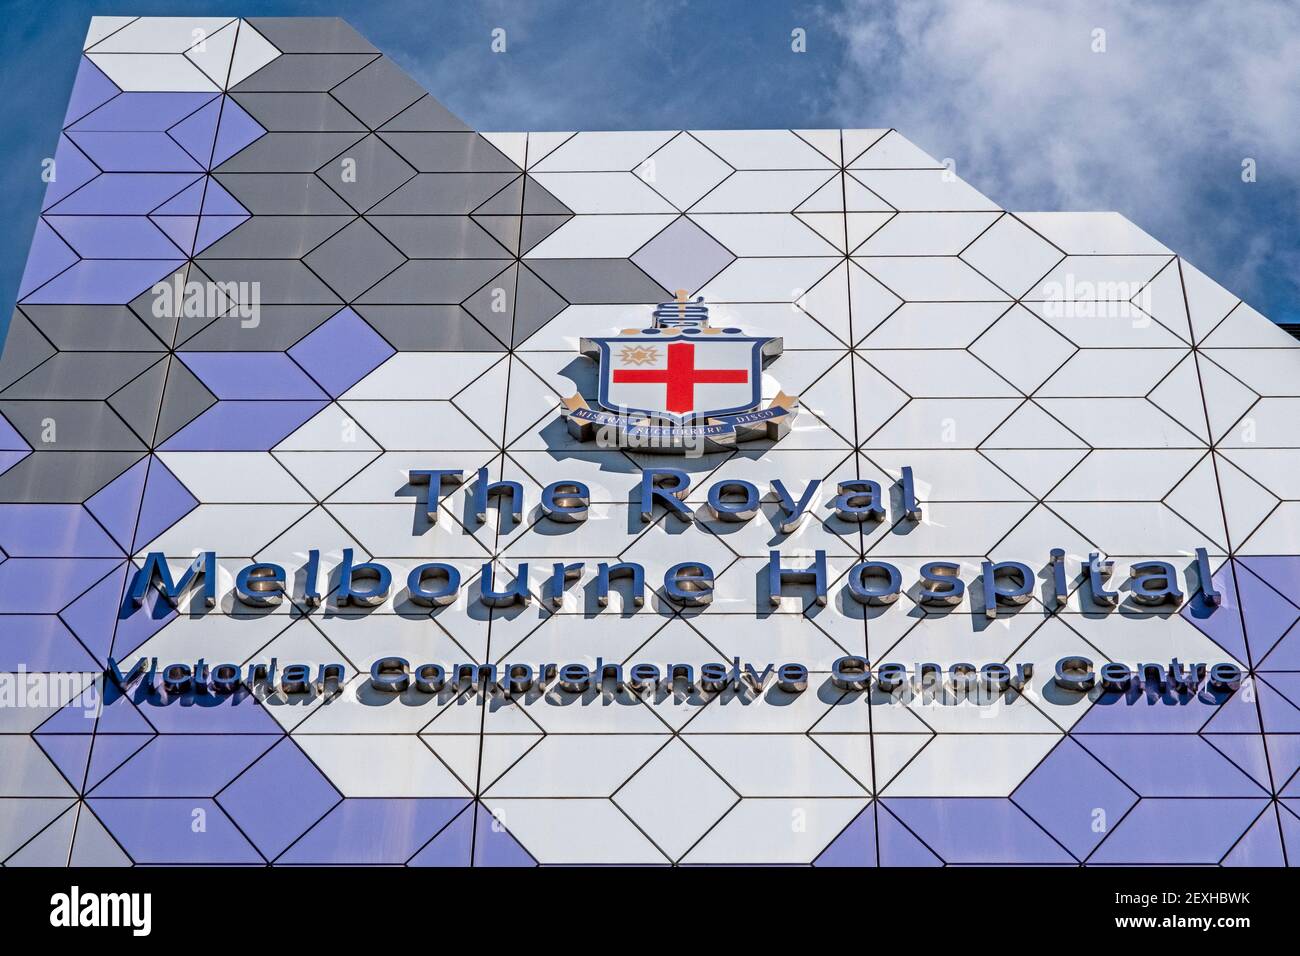 Identity signs on the wall of the Royal Melbourne Hospital Parkville, Melbourne, Victoria, Australia Stock Photo